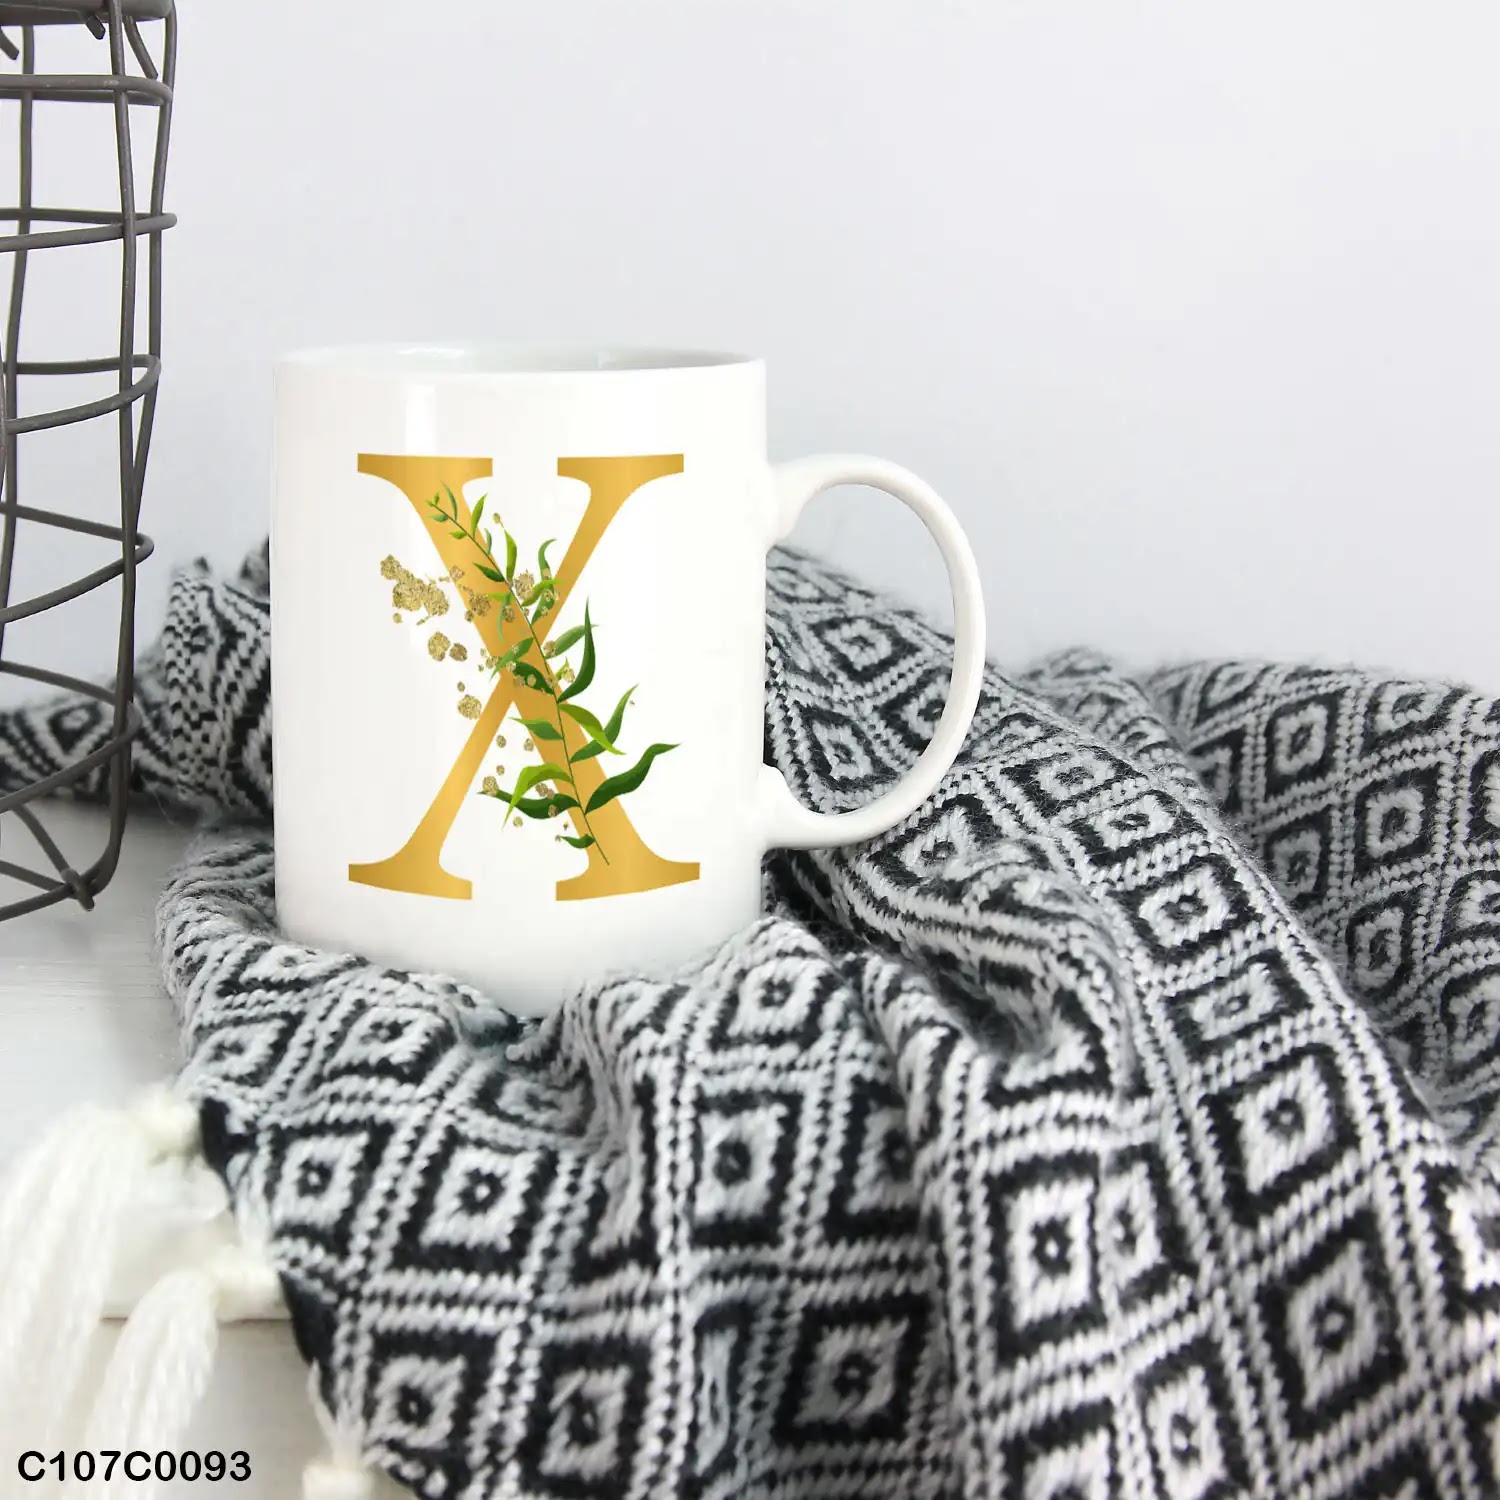 A white mug (cup) printed with gold Letter "X"and small green branch